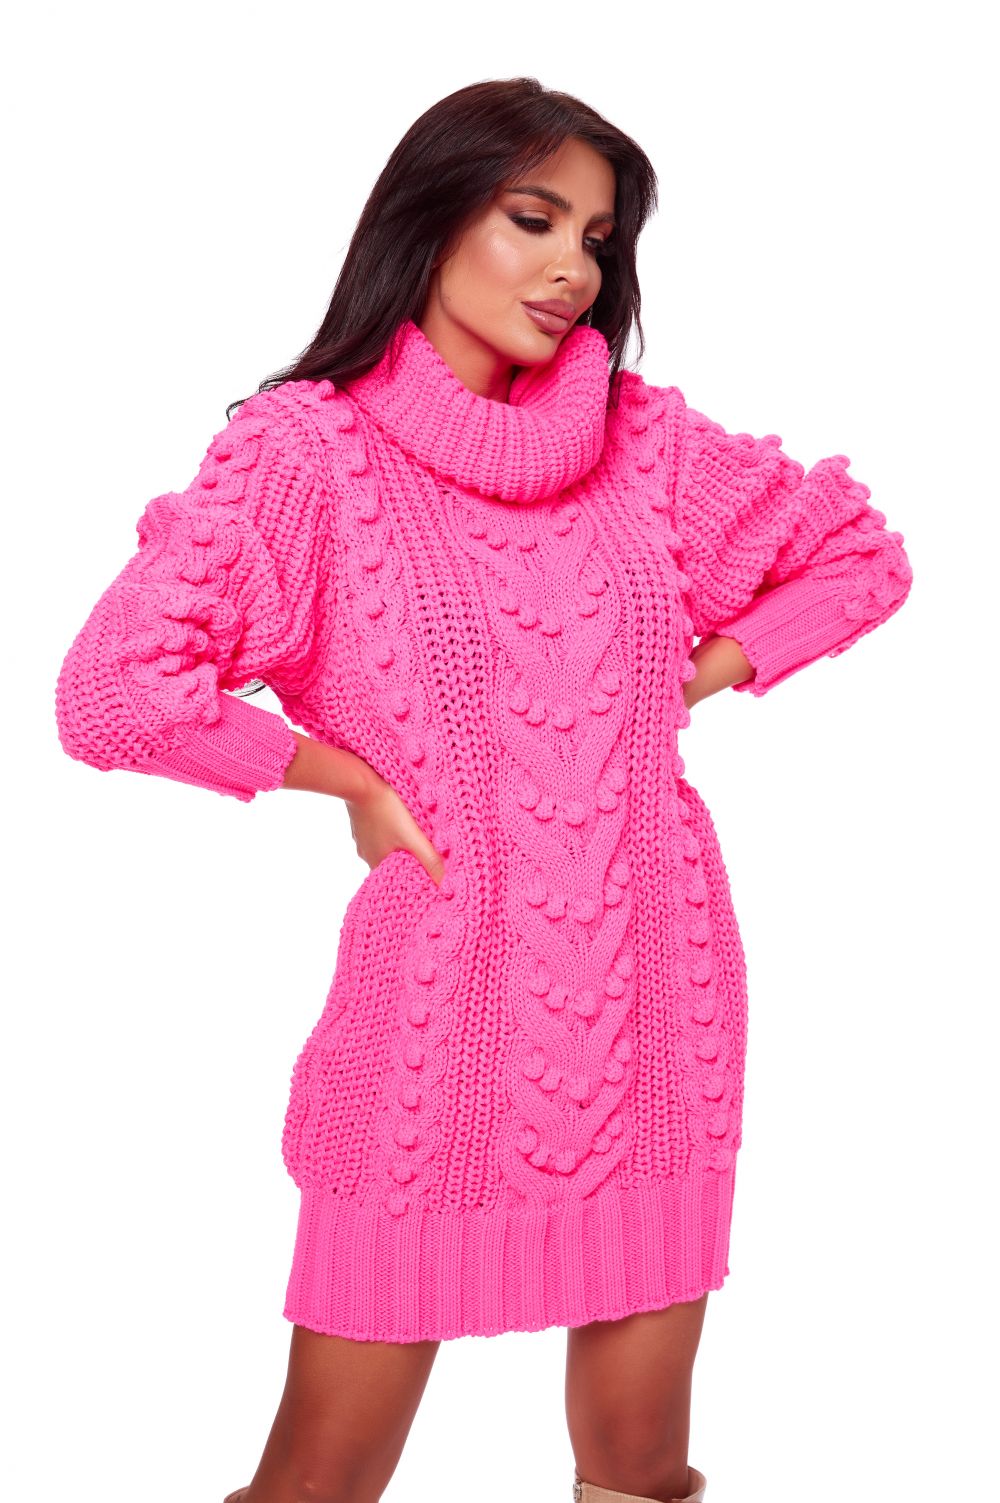 Ceccarelli Bogas casual pink knitted women's dress